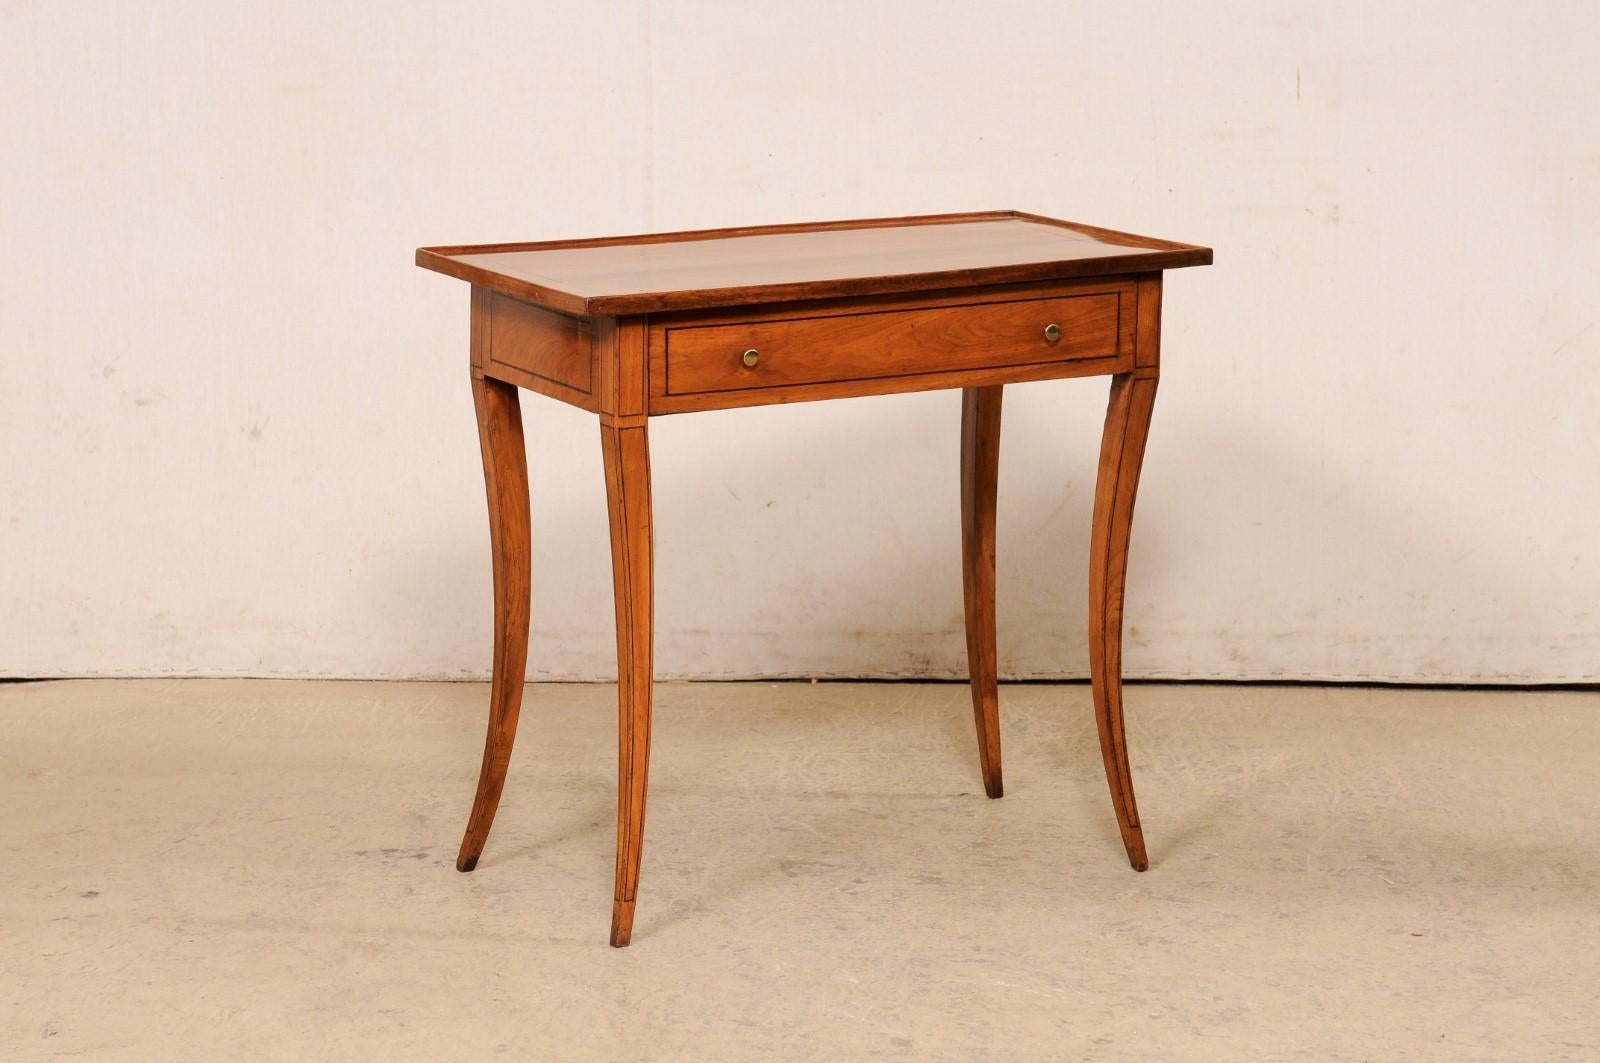 An elegant Italian carved-wood occasional table with single drawer, from the early 19th century. This antique table from Italy features a rectangular-shaped top with raised lip that gives it a tray-style top (though not removable), with a